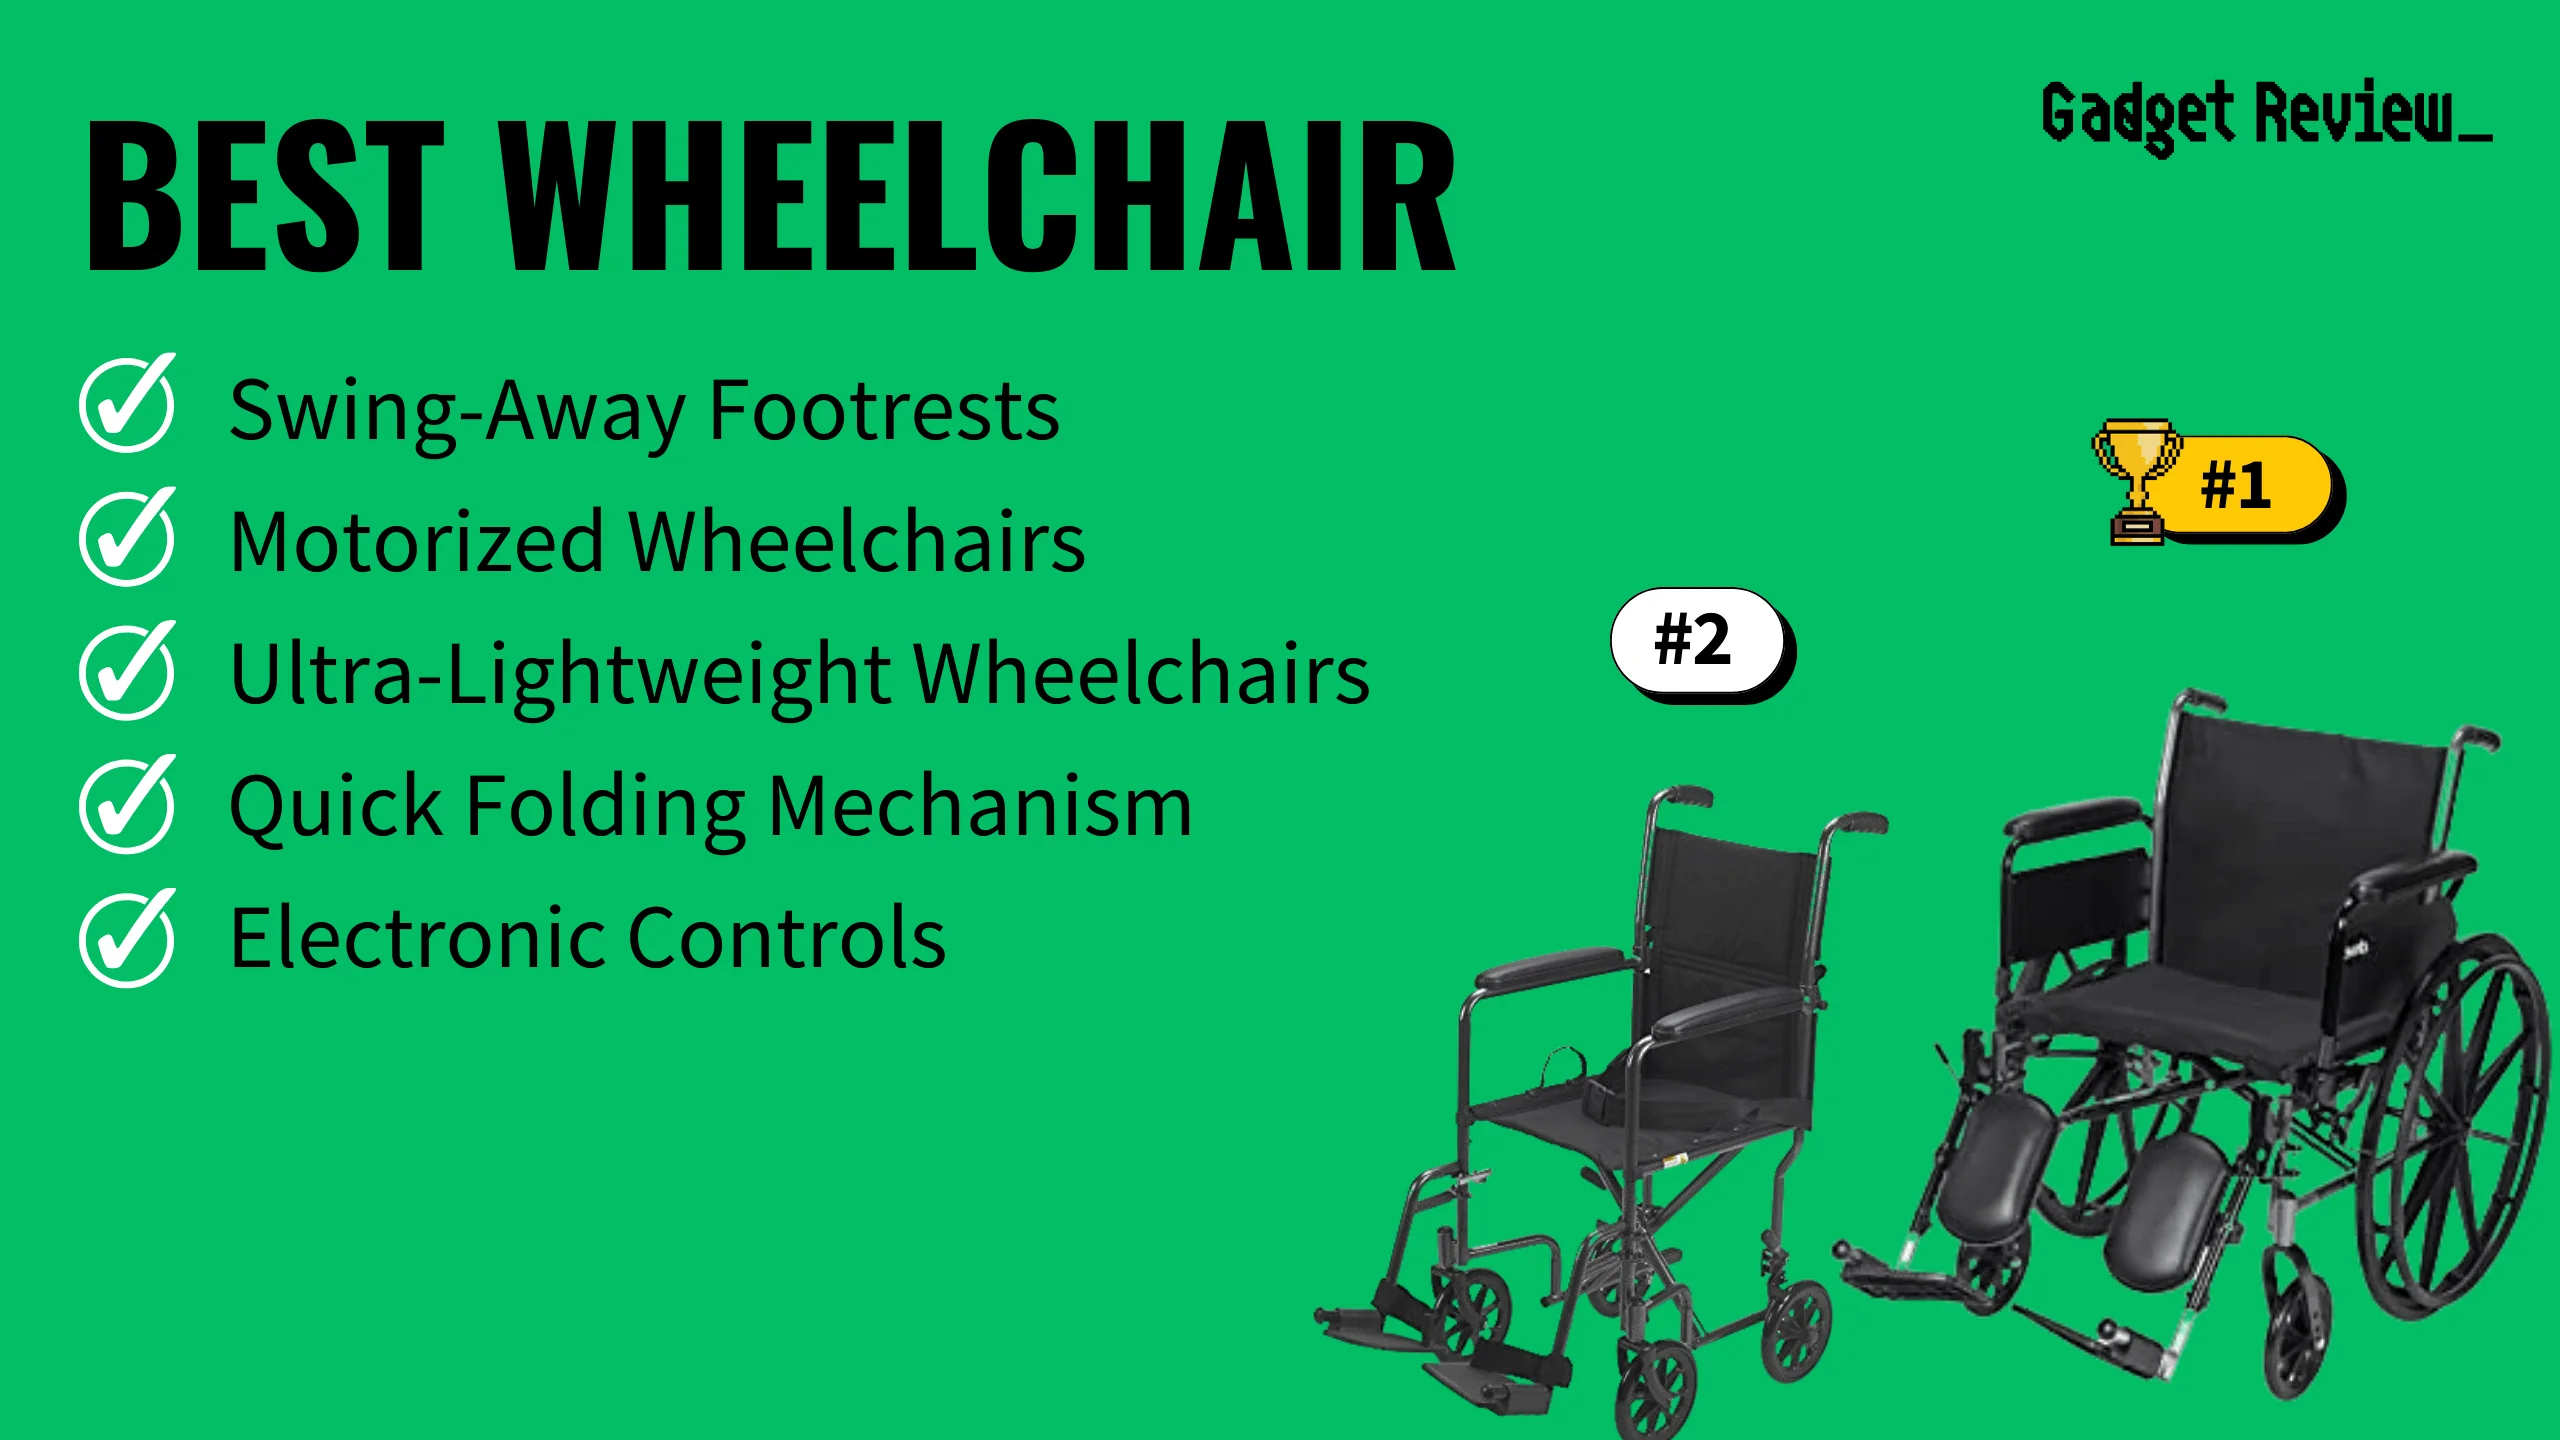 best wheelchair featured image that shows the top three best health & wellnes models